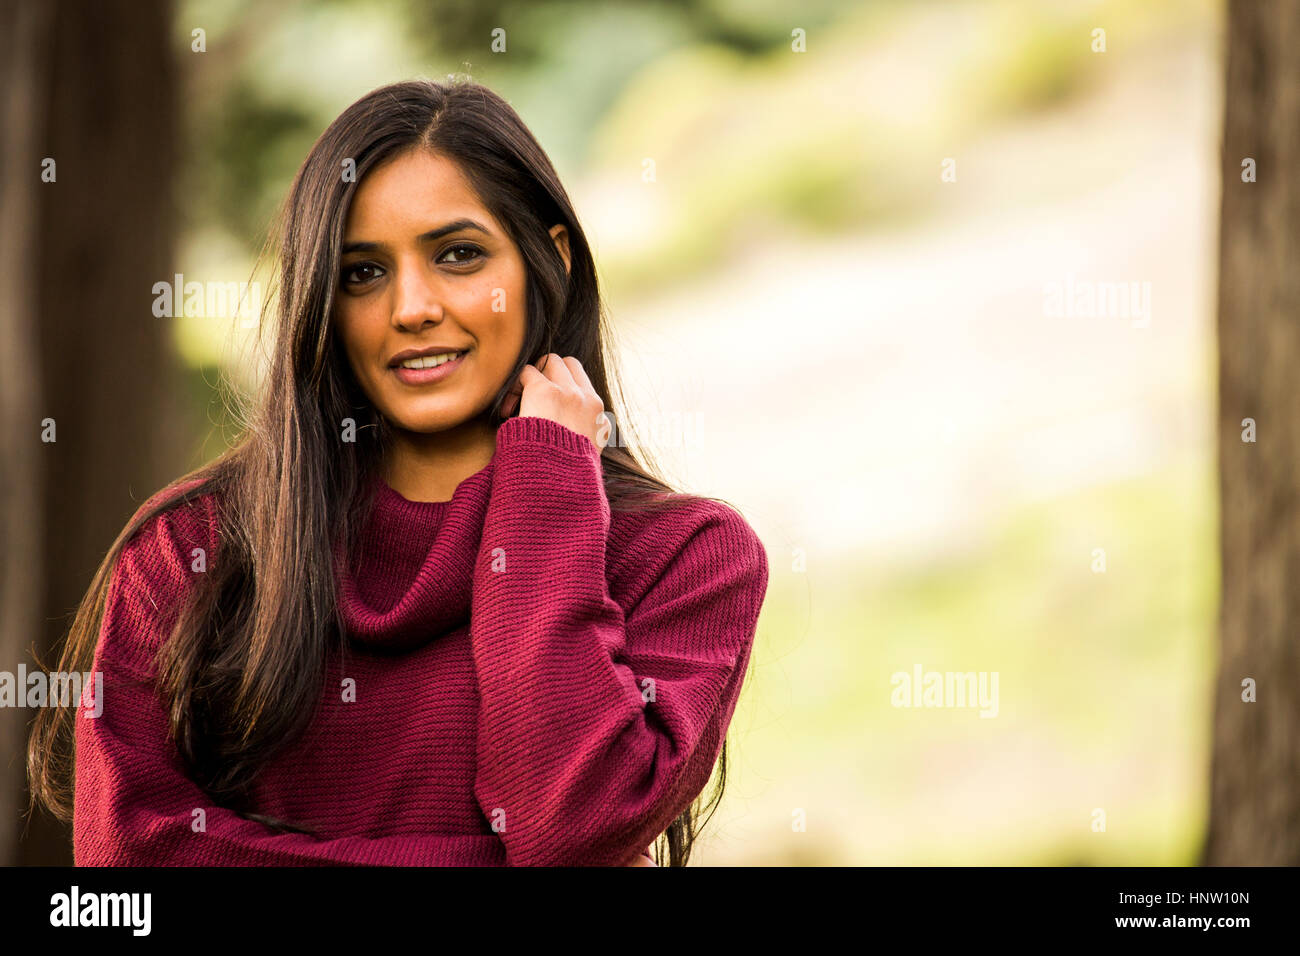 Portrait of smiling Indian woman wearing sweater Stock Photo